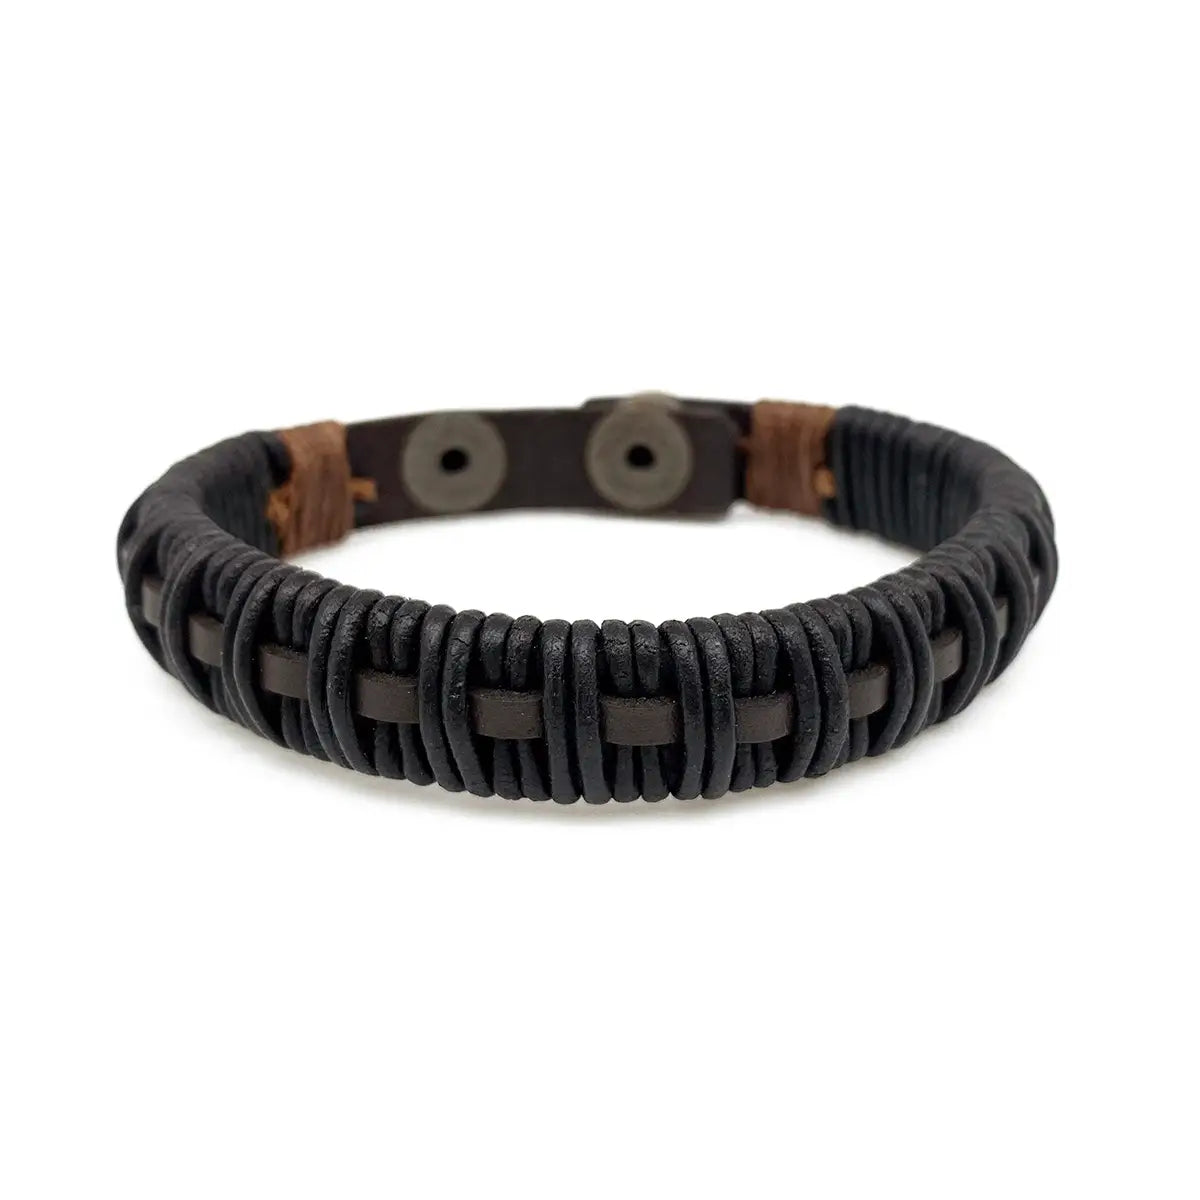 Woven Leather Snap Men's Bracelet: Brown and Black